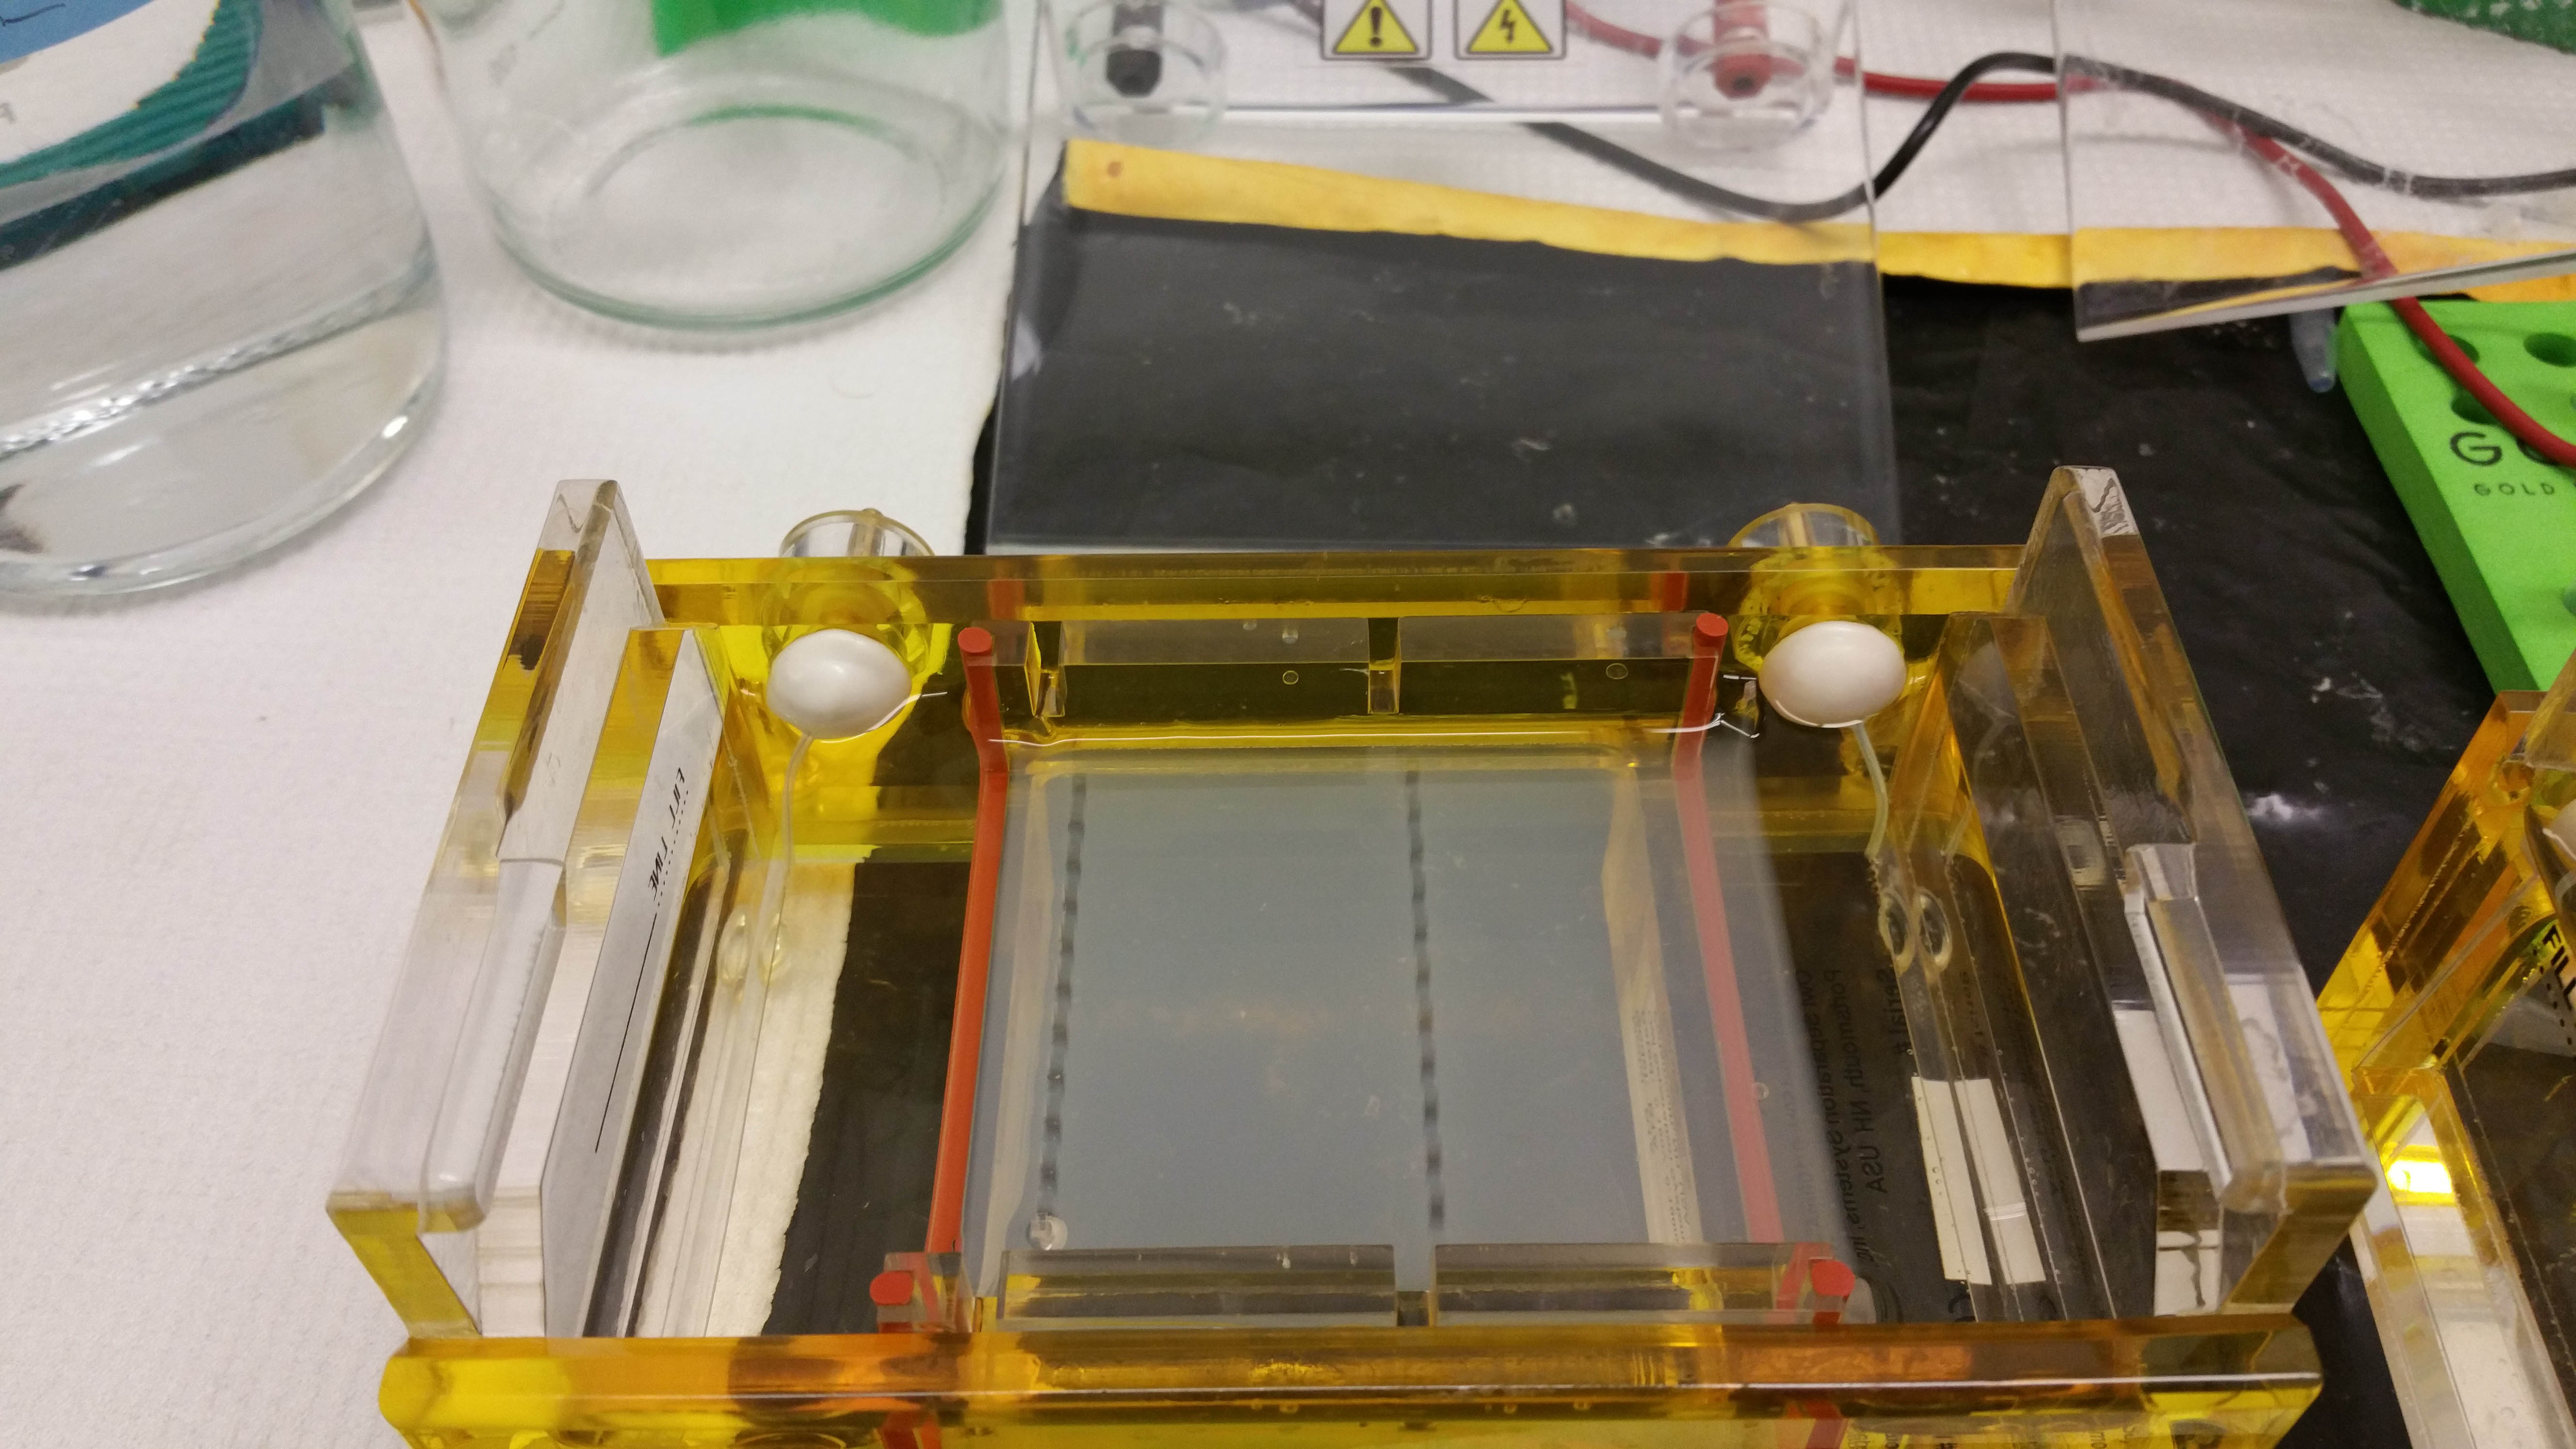 25 Real Lab Hacks from Researchers Like You - Fix a cracked gel rig with 4% agarose or higher